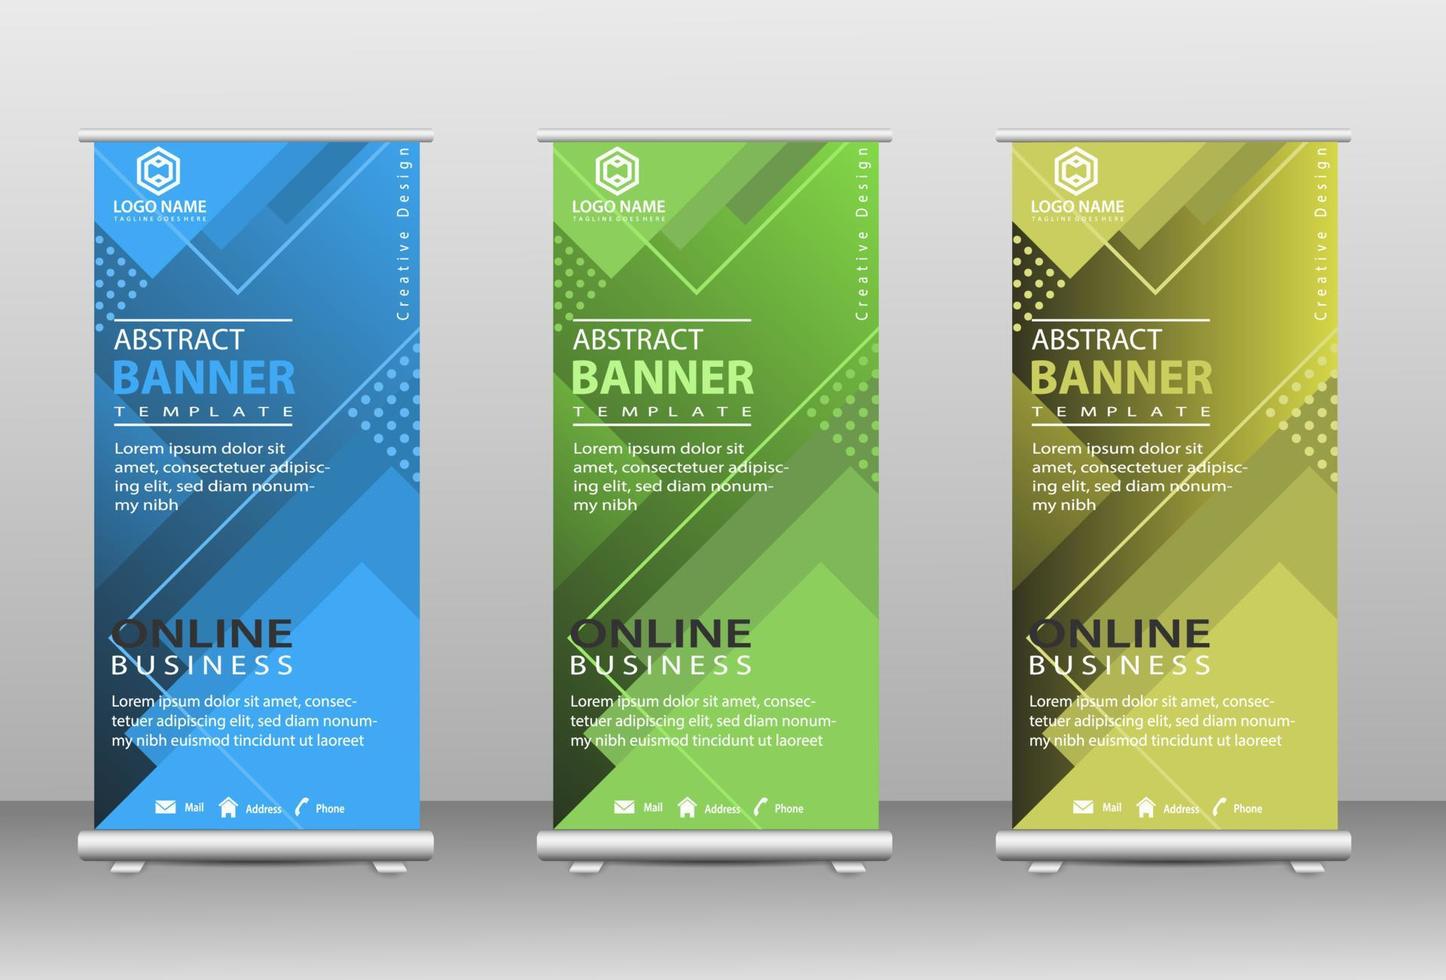 Stylish roll up business standee banner design vector